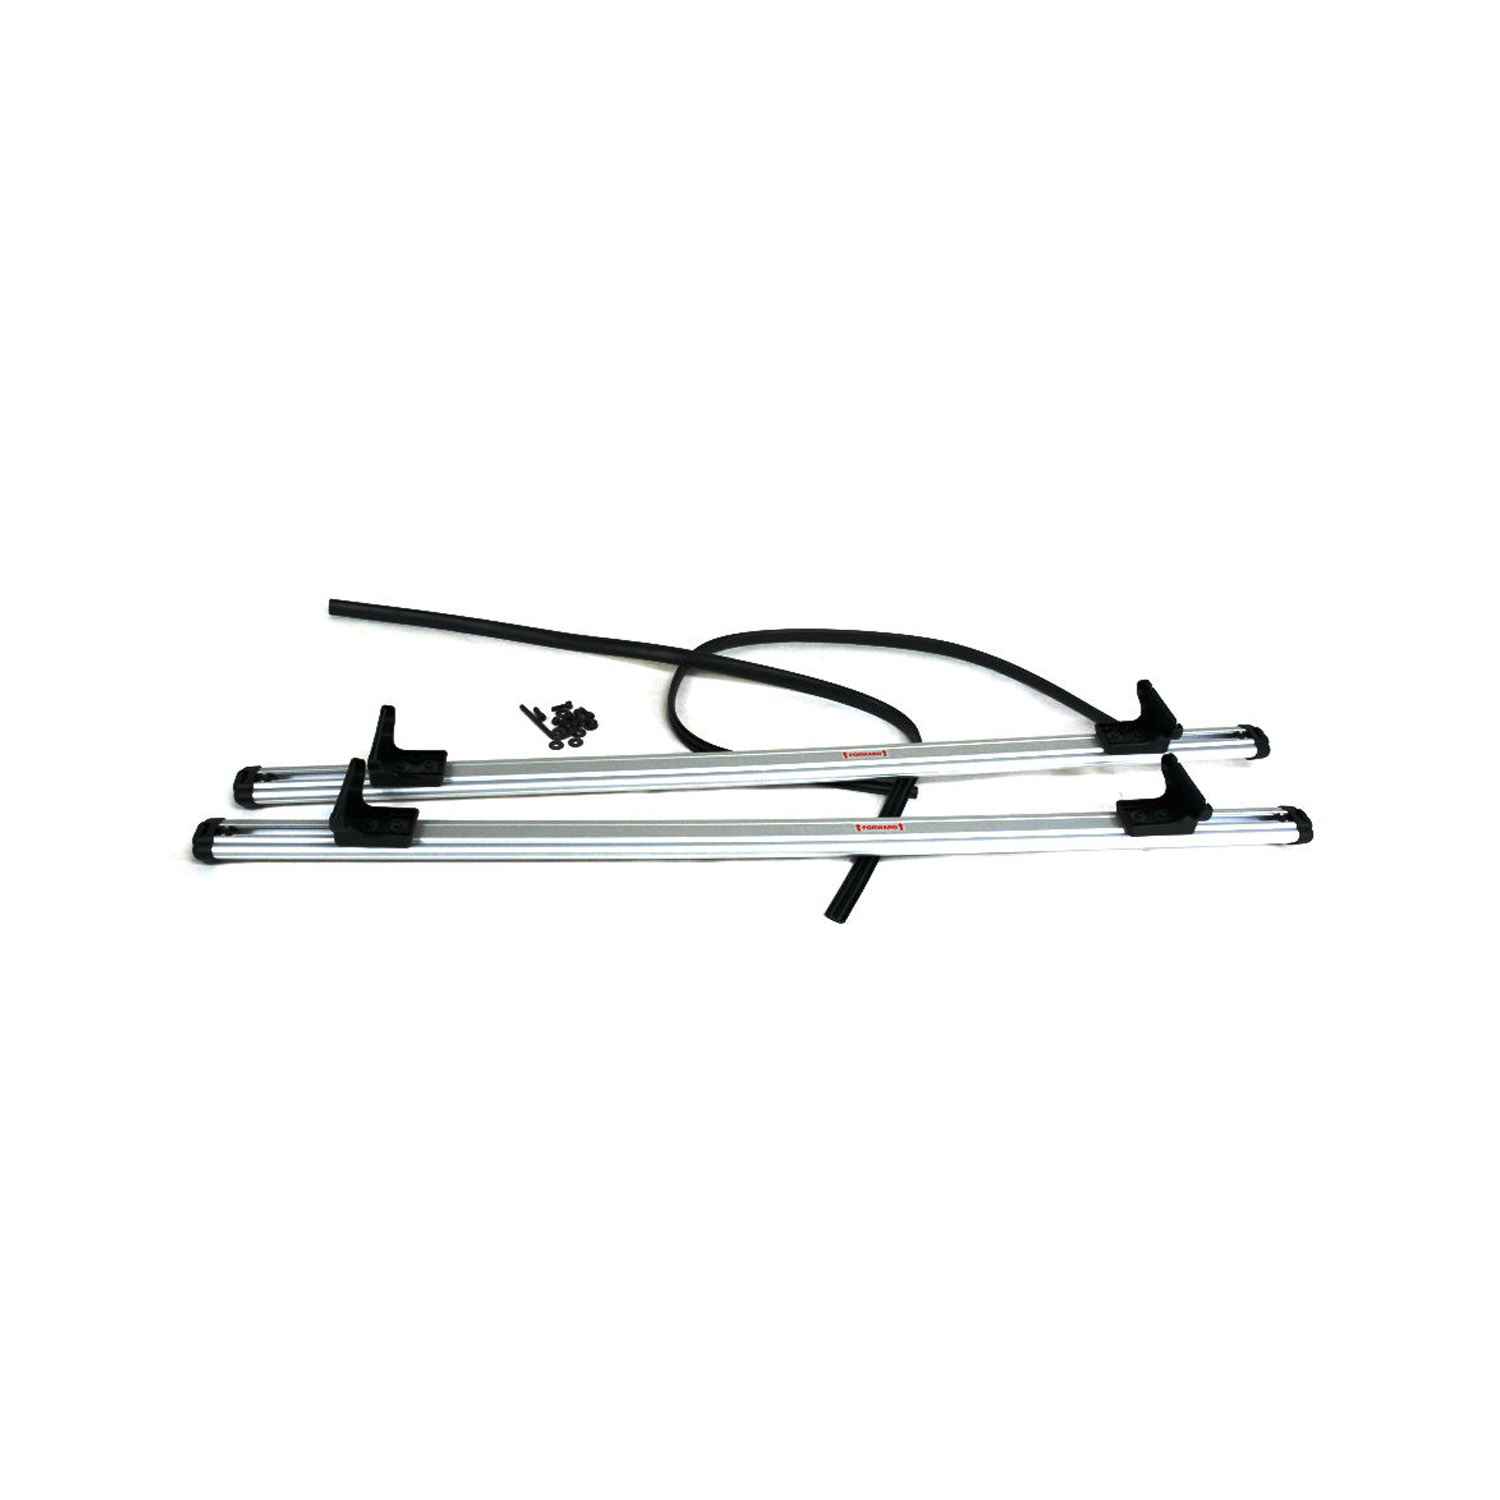 2013 Jeep Compass Removable Roof Rack Kit 82212352